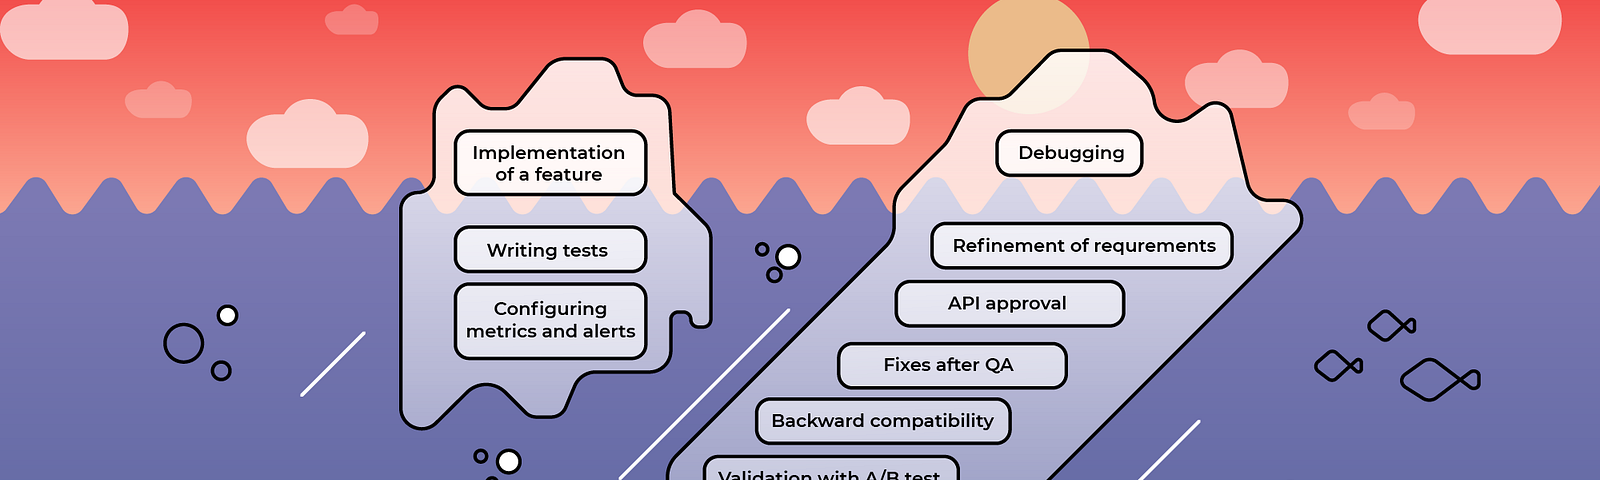 The iceberg of software development stages. Implementation of a feature, writing tests, configuring metrics and alerts, debugging, refinement of requirements, API review & approval, fixes after QA, backward compatibility, validation with A/B test, hotfixes, analytics.